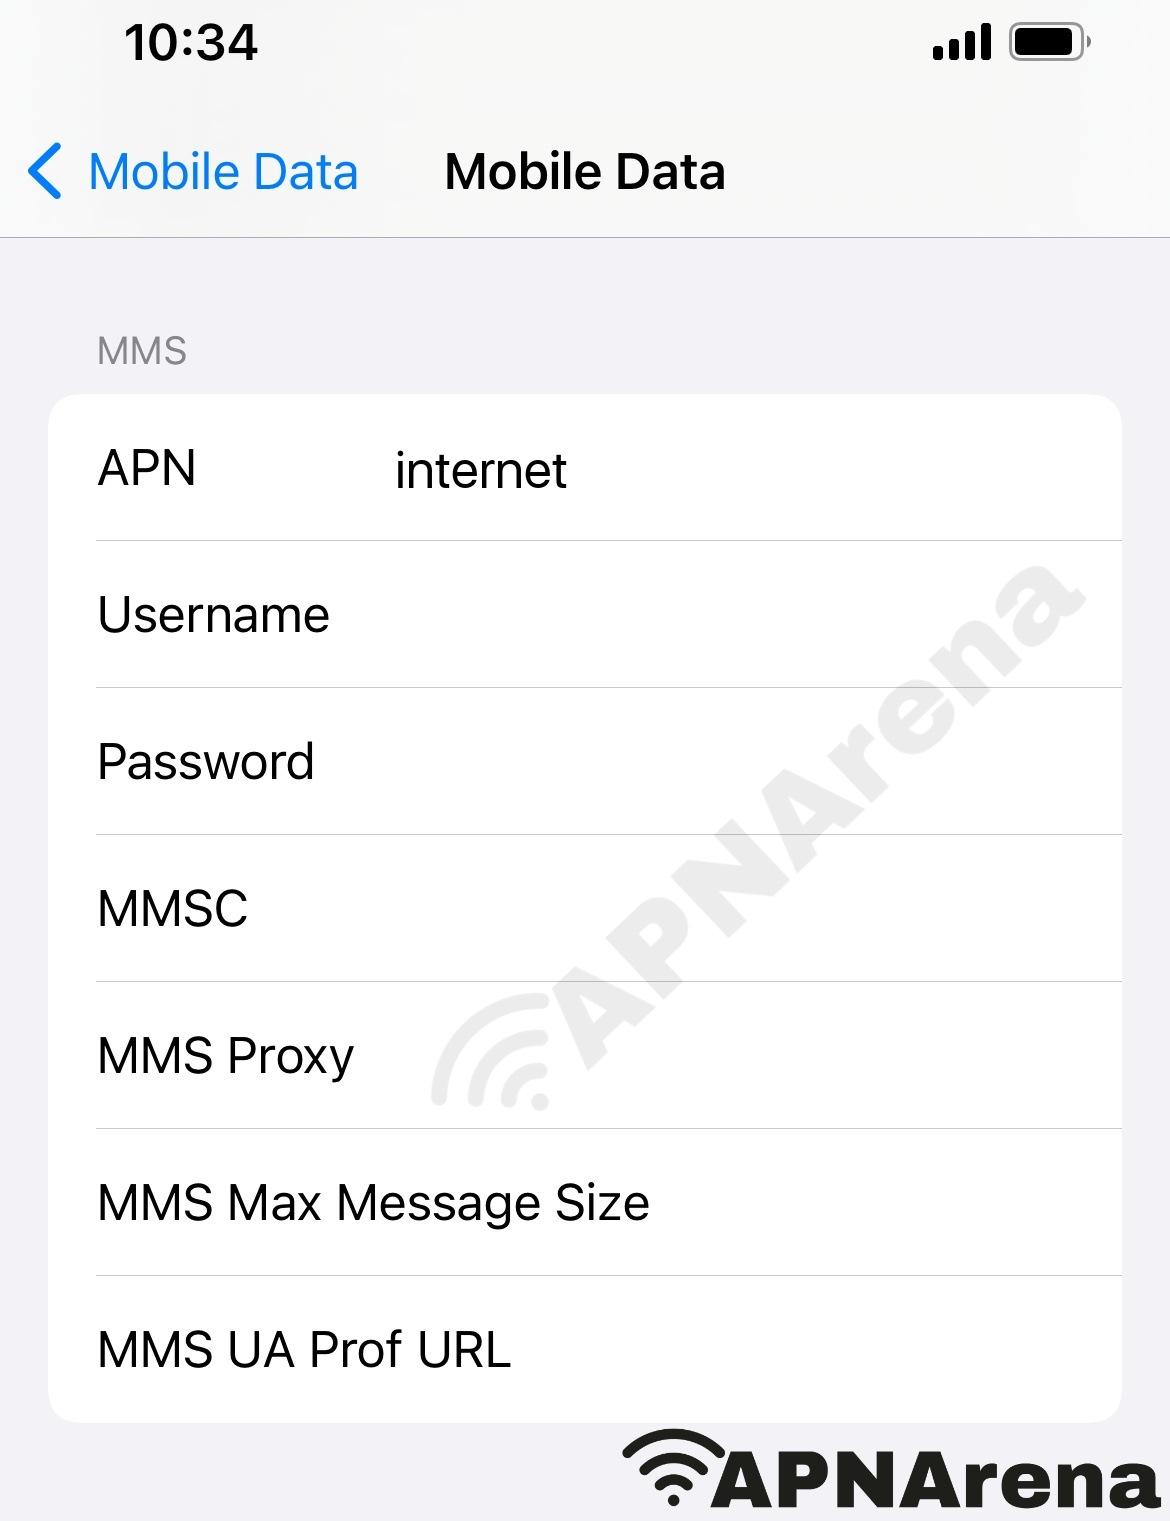 Fonic mobile (ex Lidl) MMS Settings for iPhone